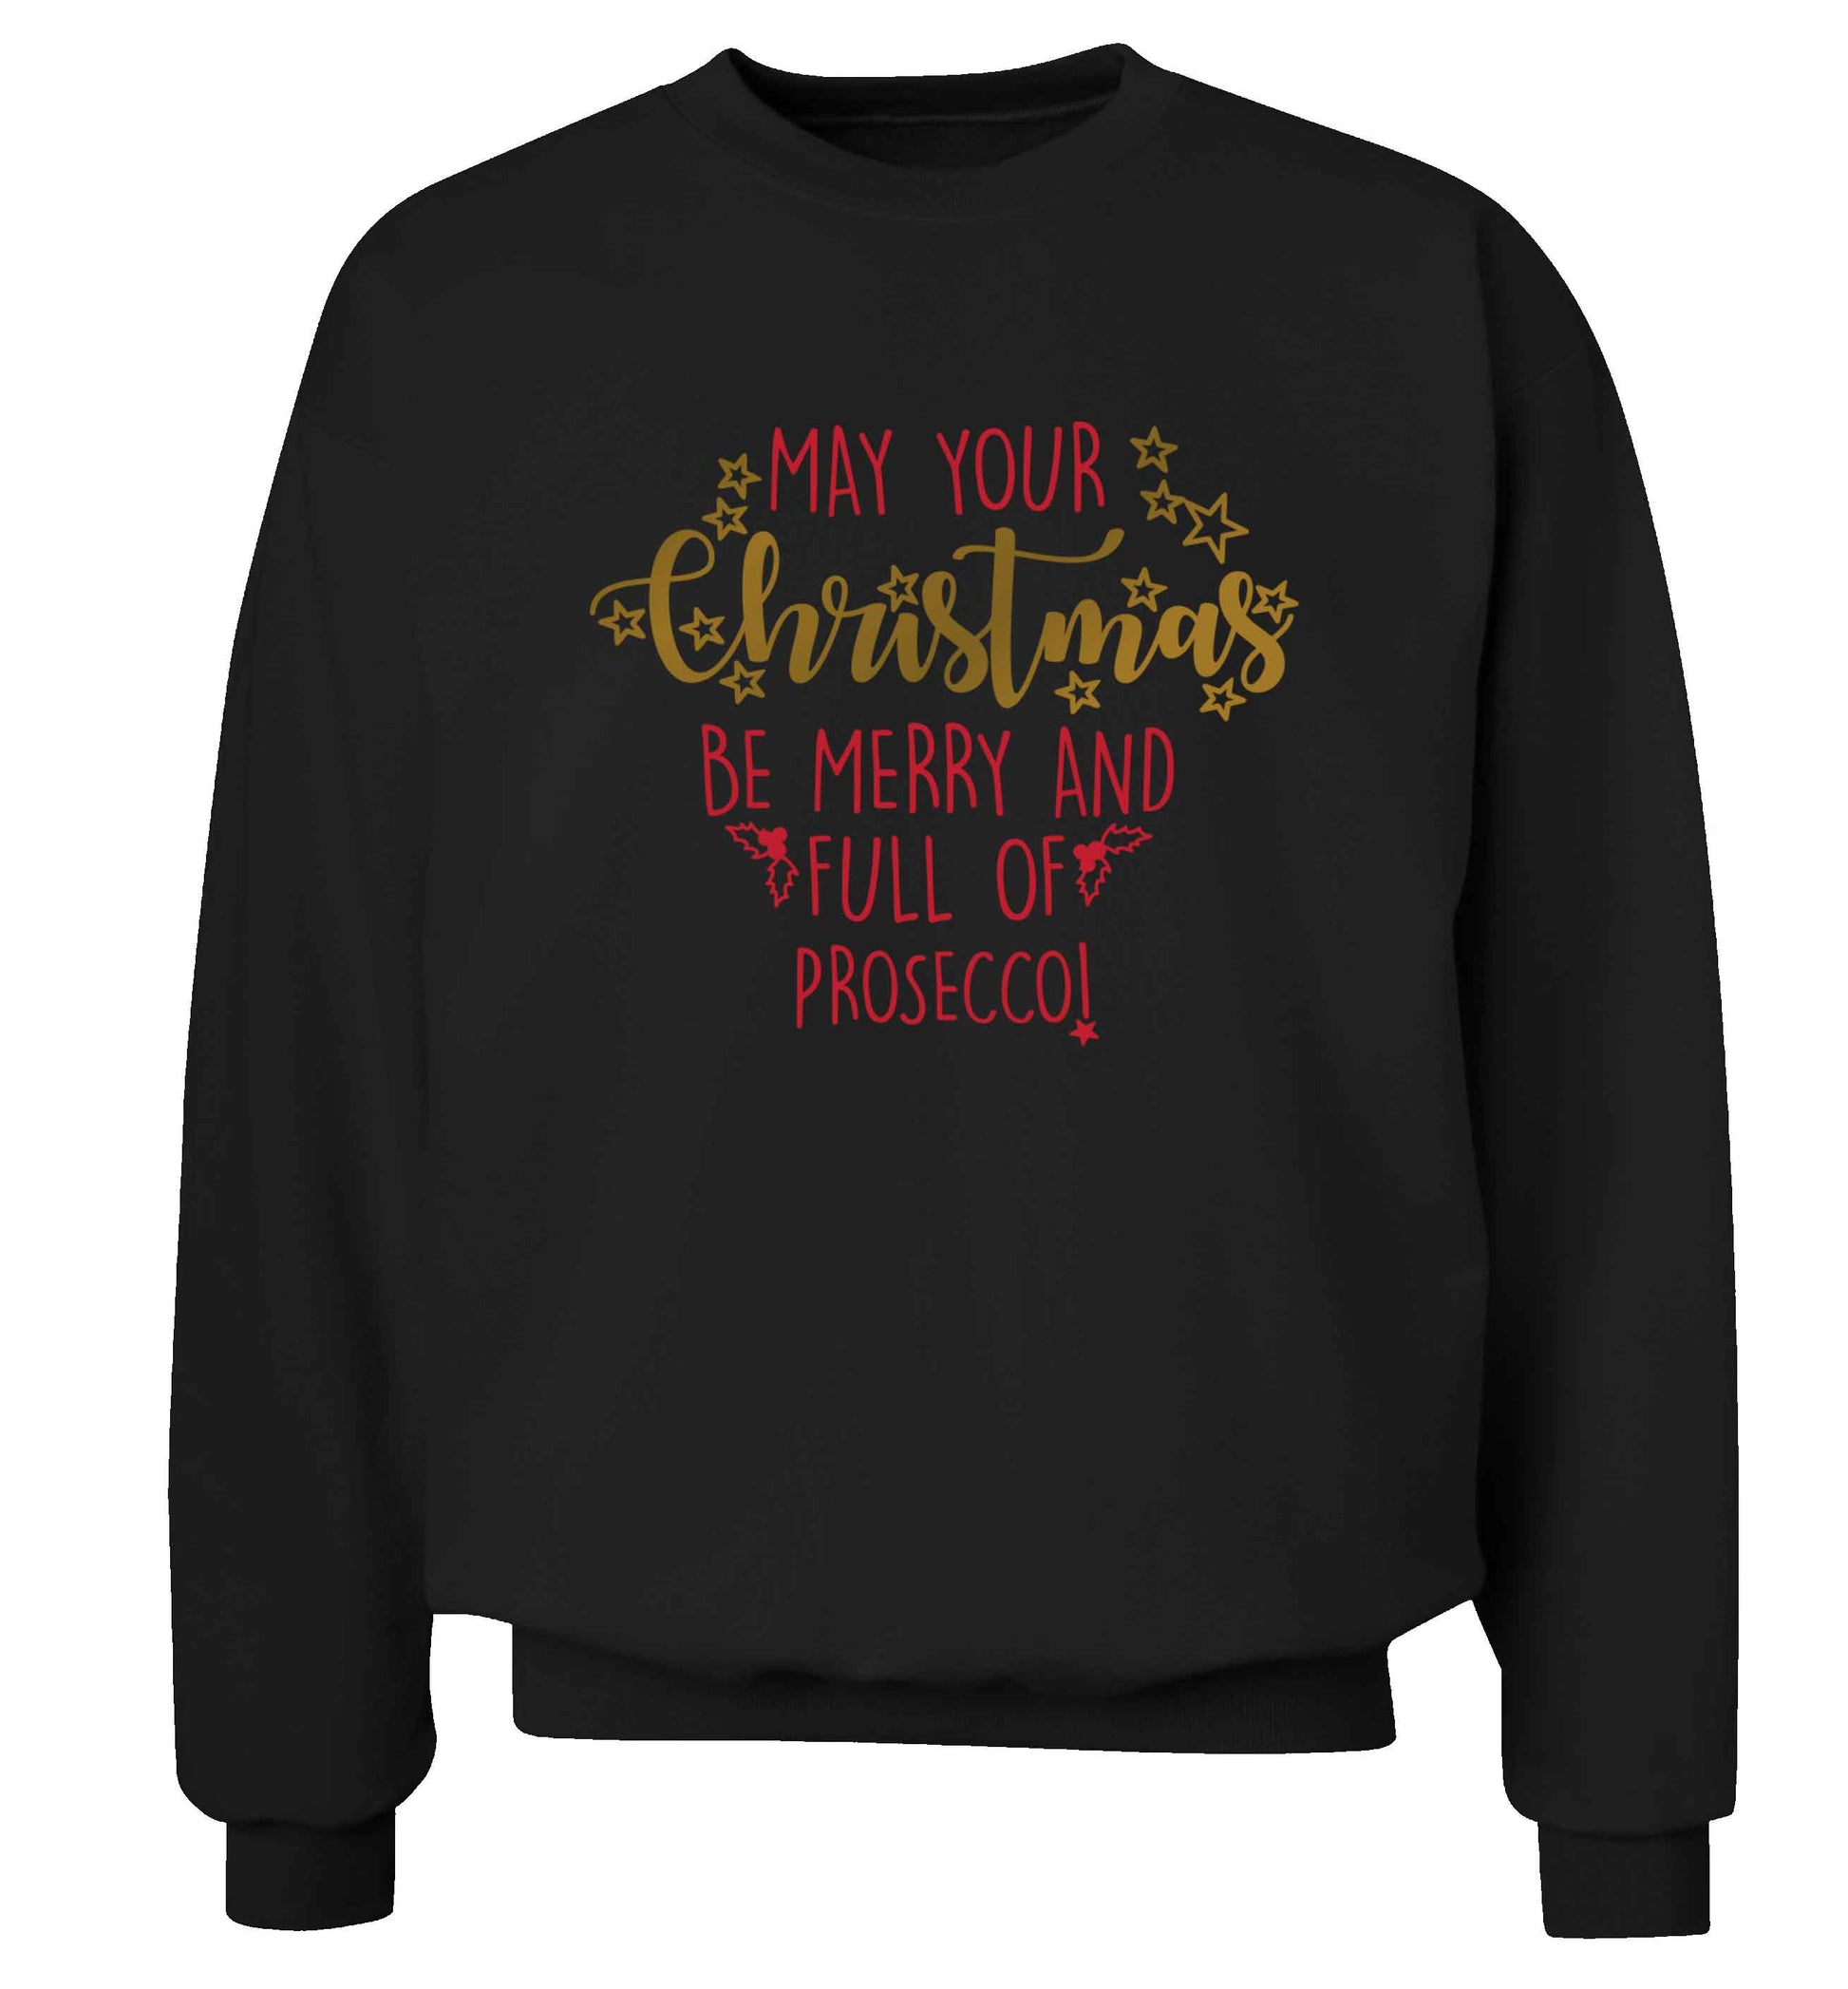 May your Christmas be merry and full of prosecco Adult's unisex black Sweater 2XL